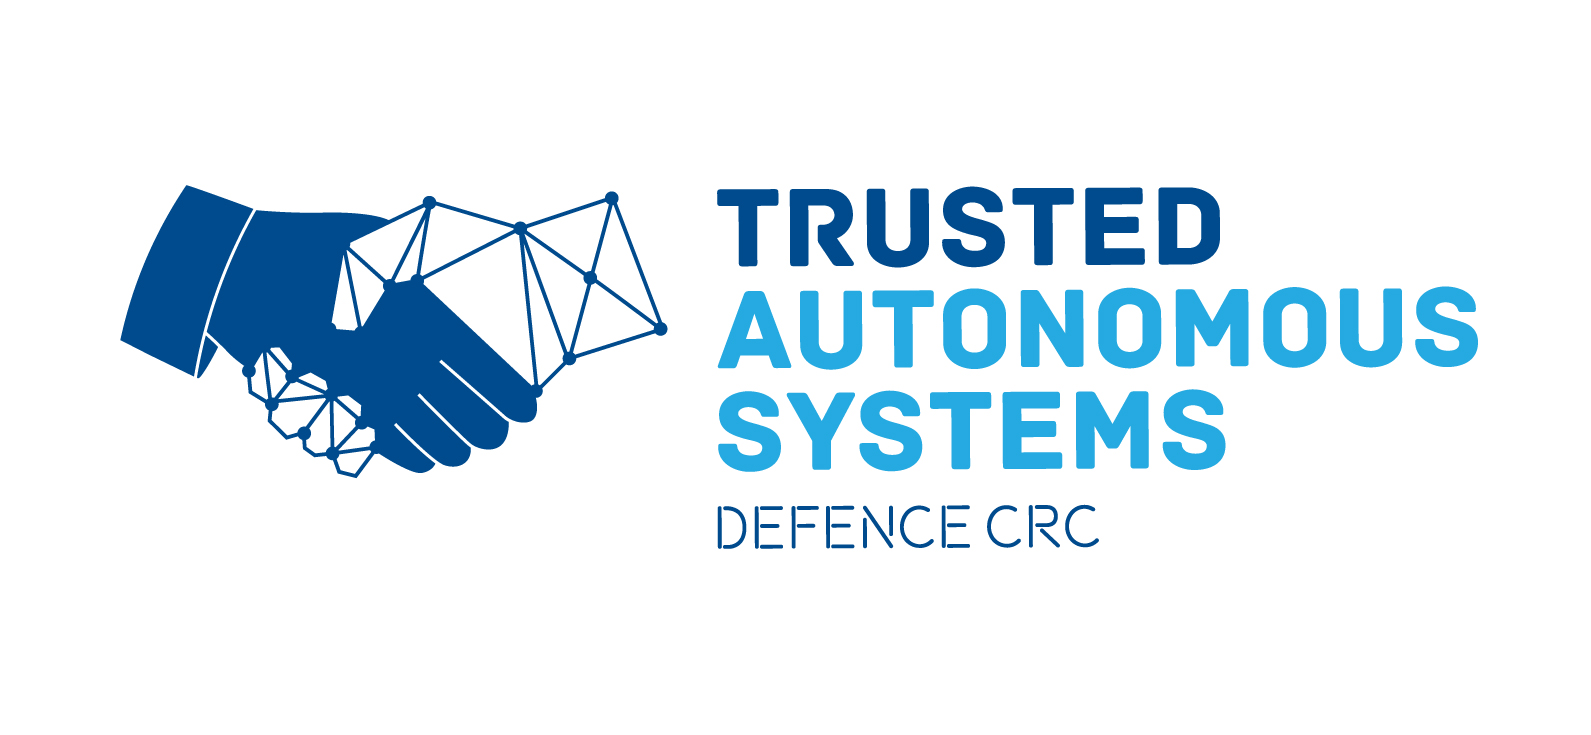 Trusted Autonomous Systems Defence CRC